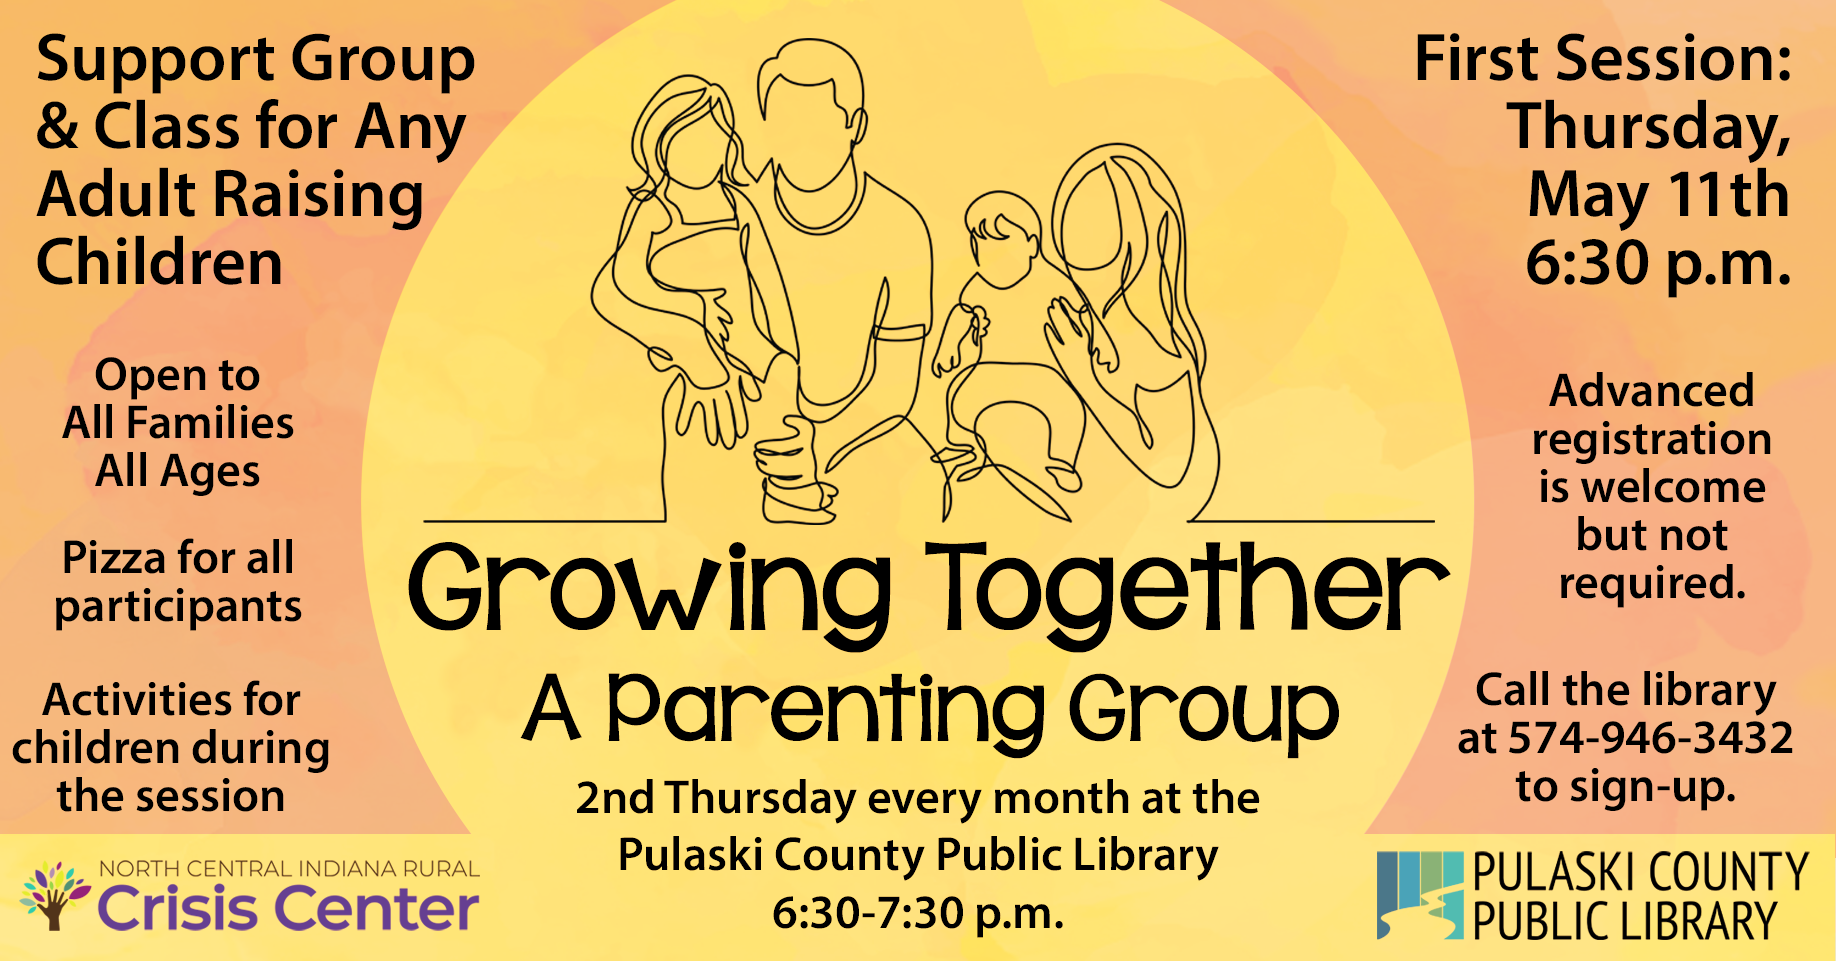 Growing Together: Line drawing of parents holding their young children alongside information about the program.